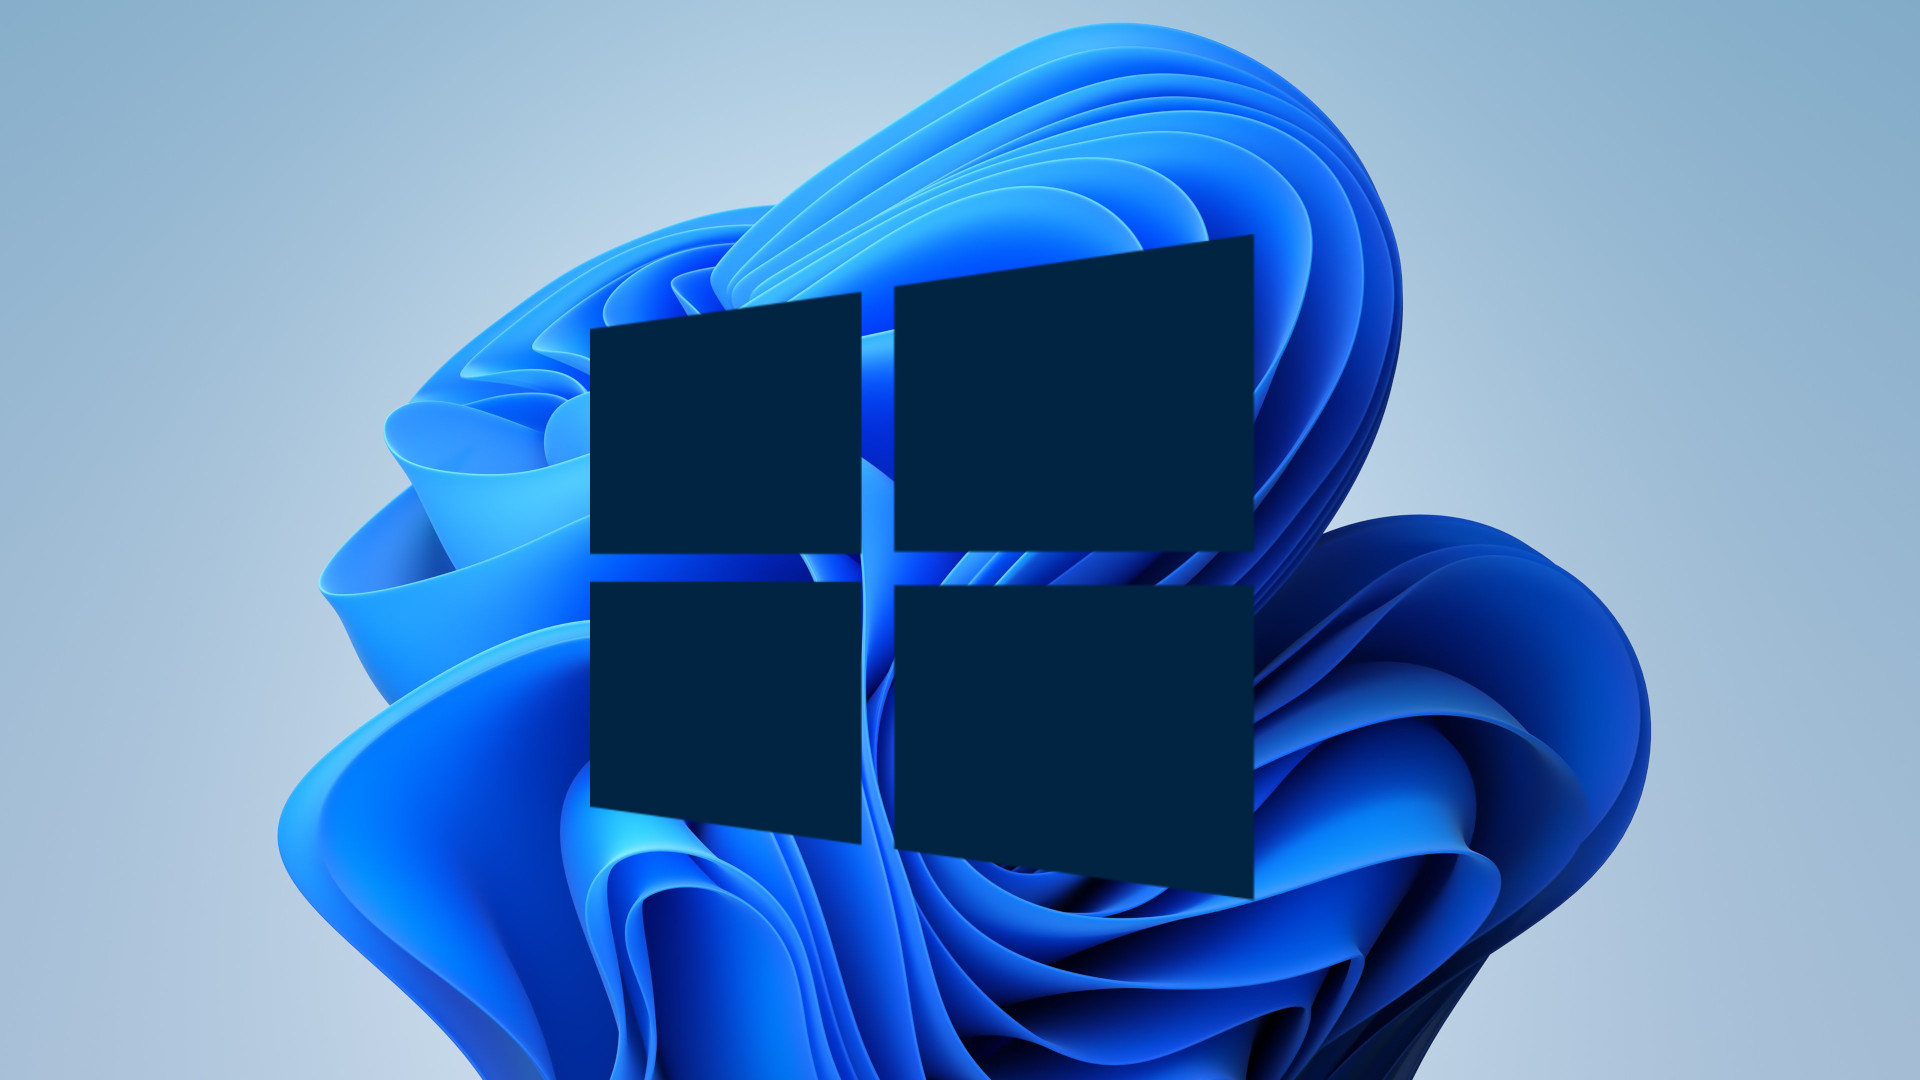 Upgrade Windows 10 as deadline passes and Microsoft forces update